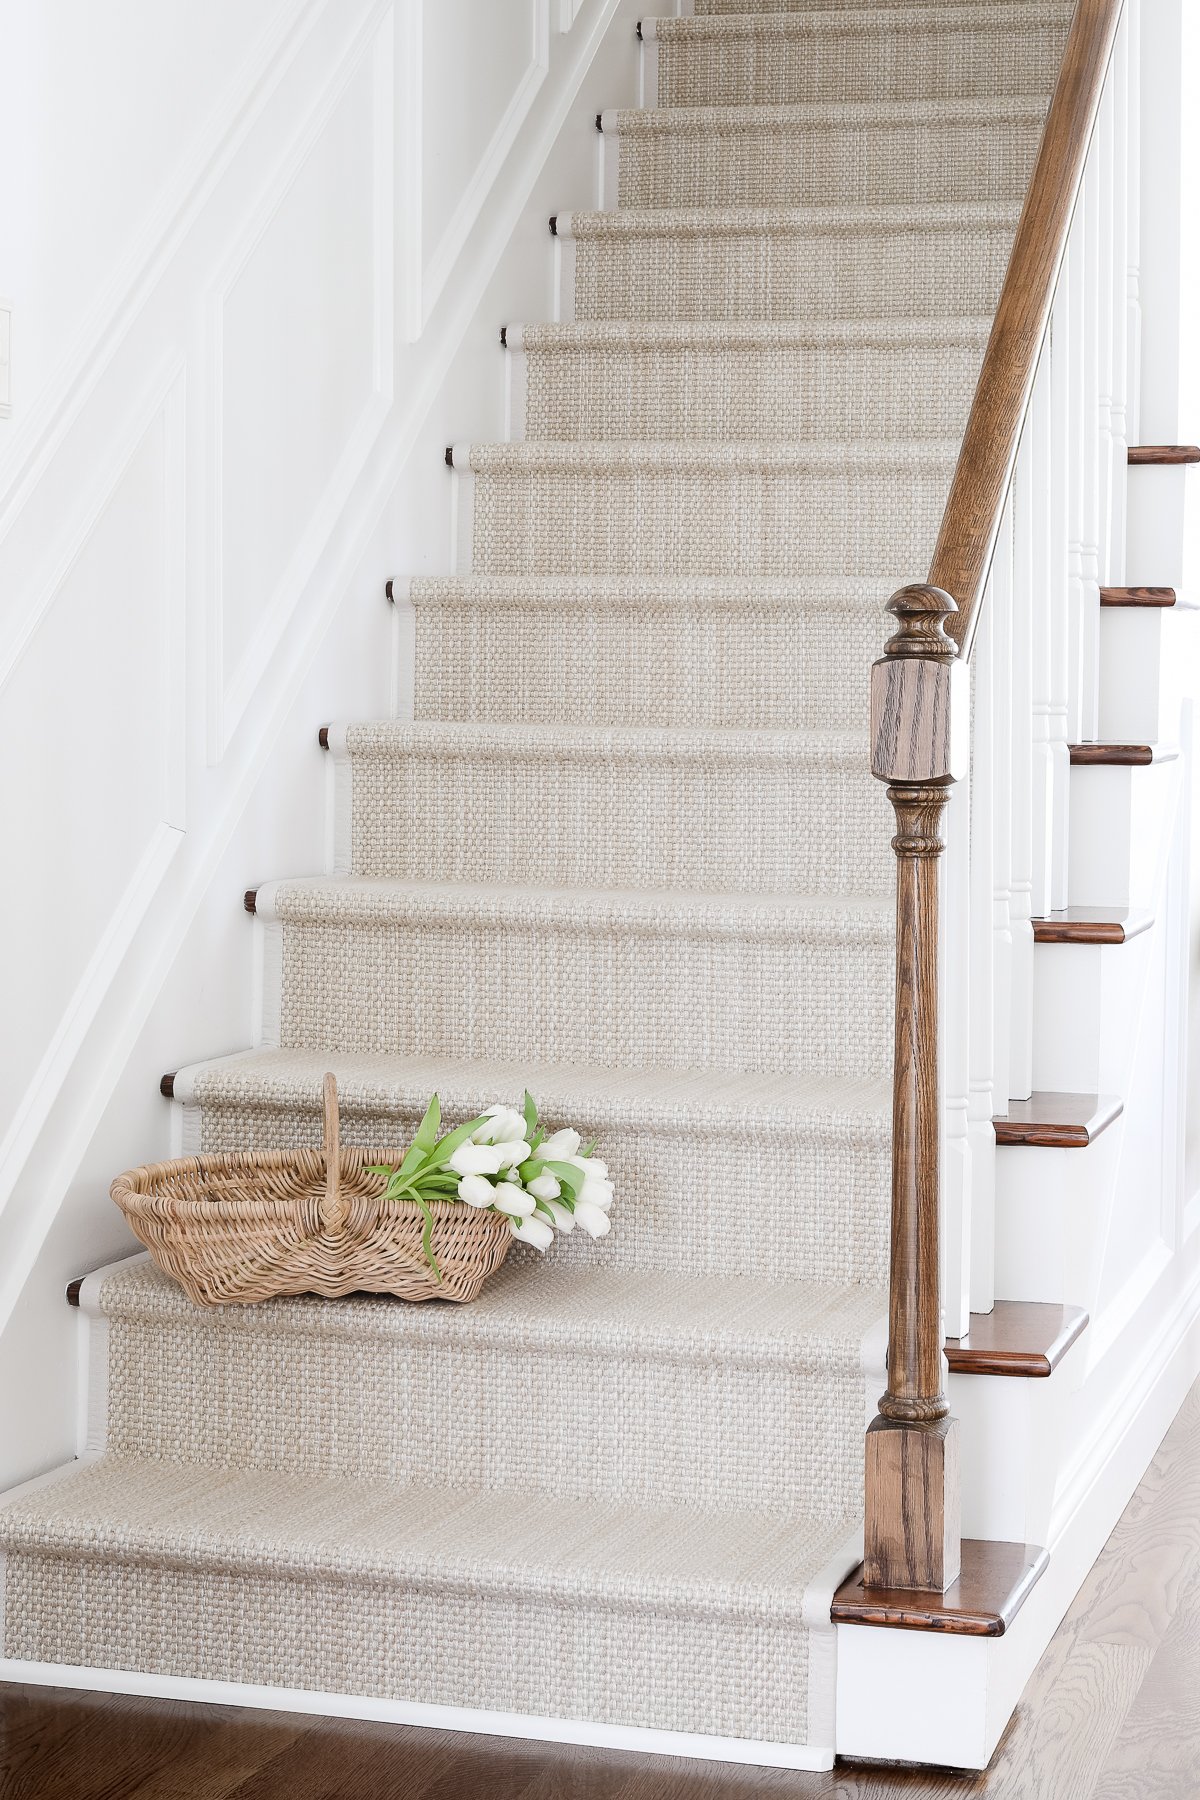 A wooden staircase with a diy stair runner.